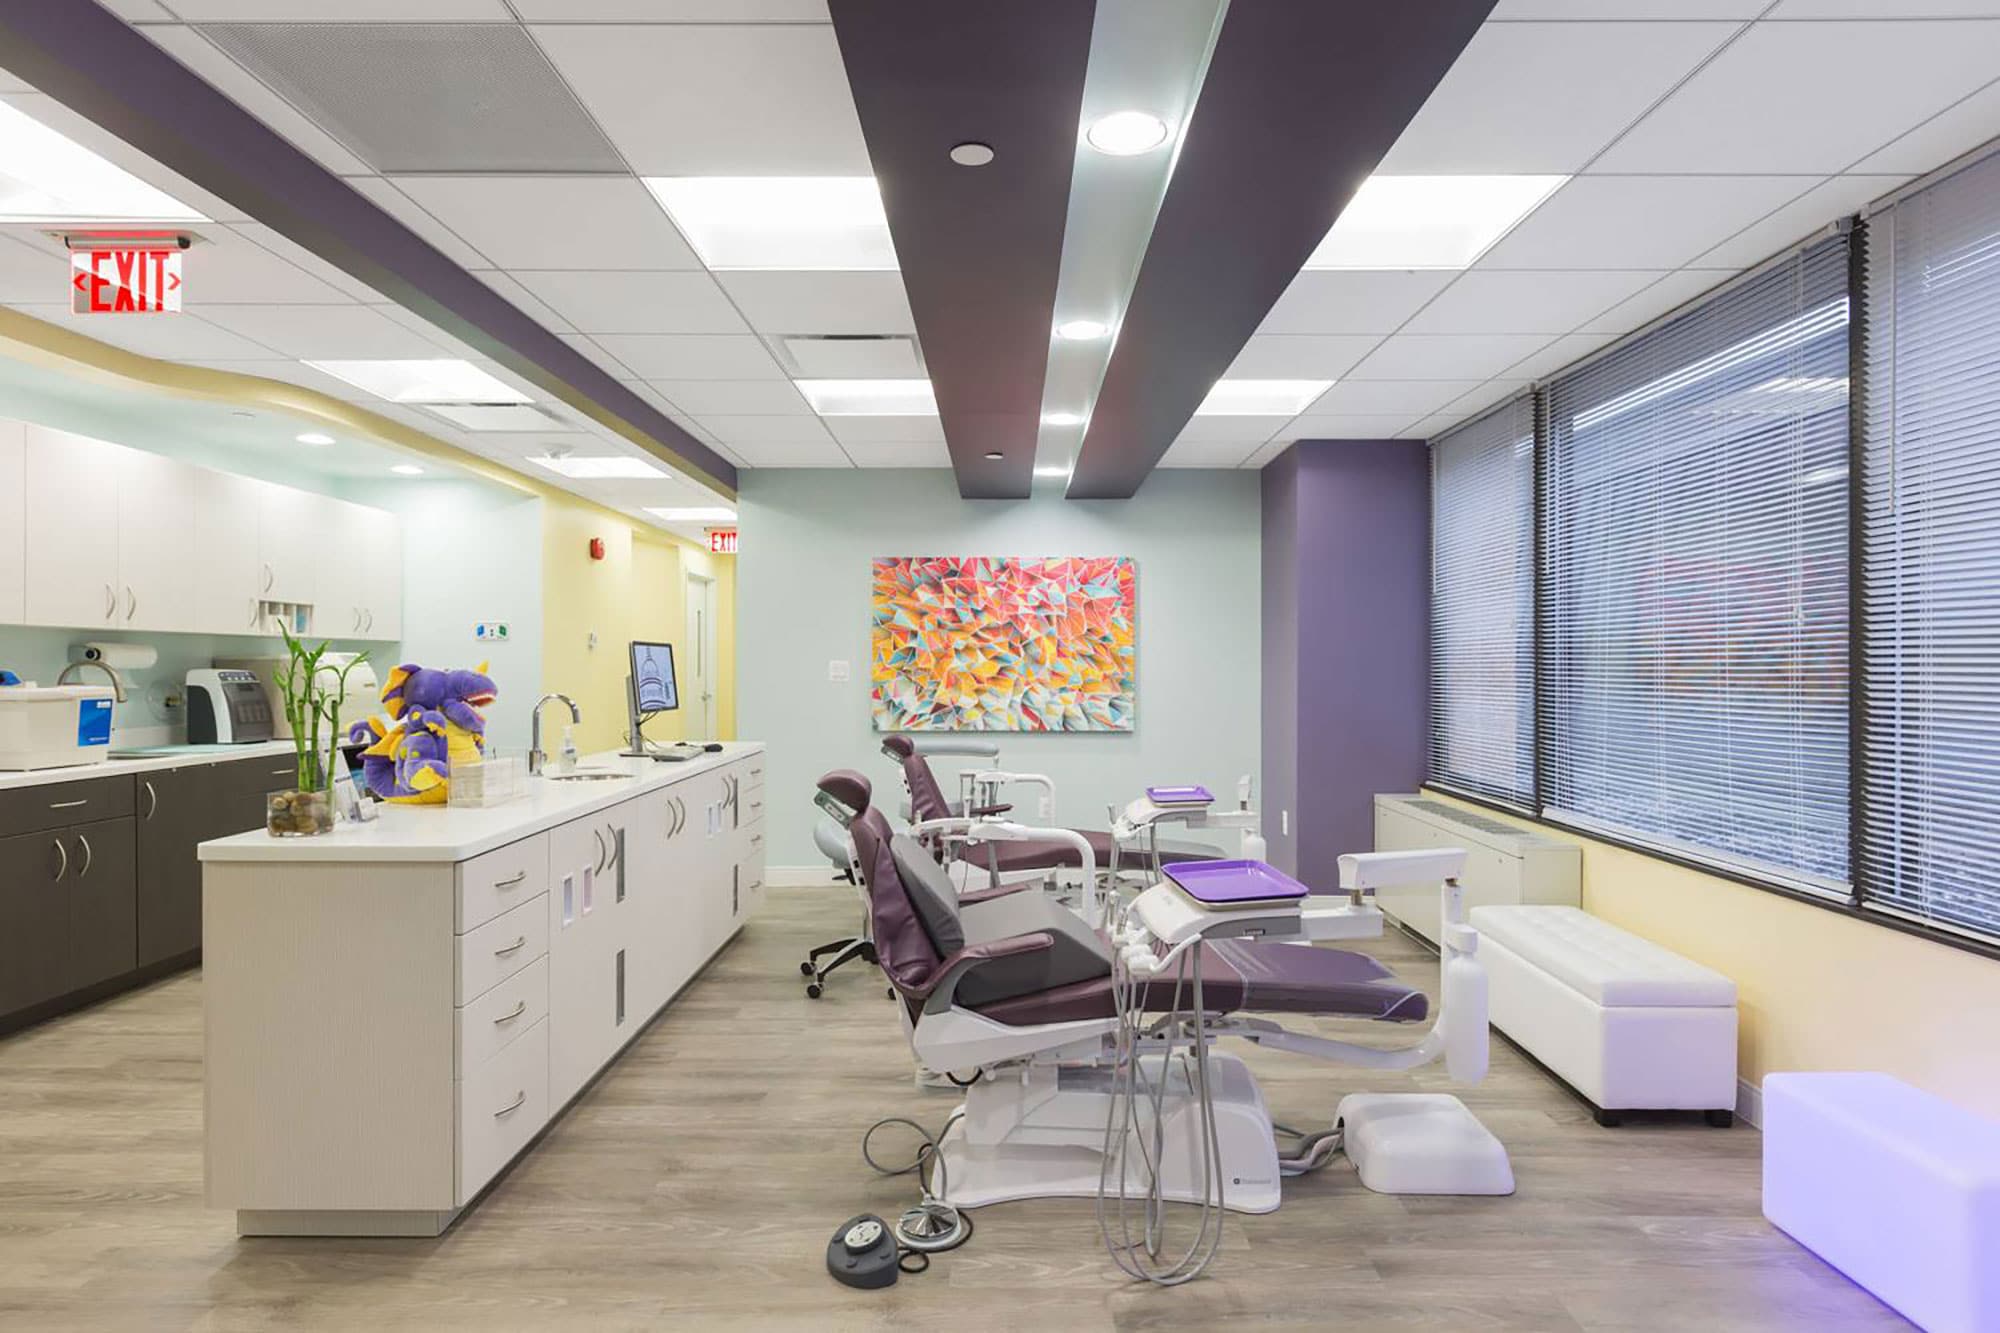 dental examination area with purple and yellow accents with white cabinets